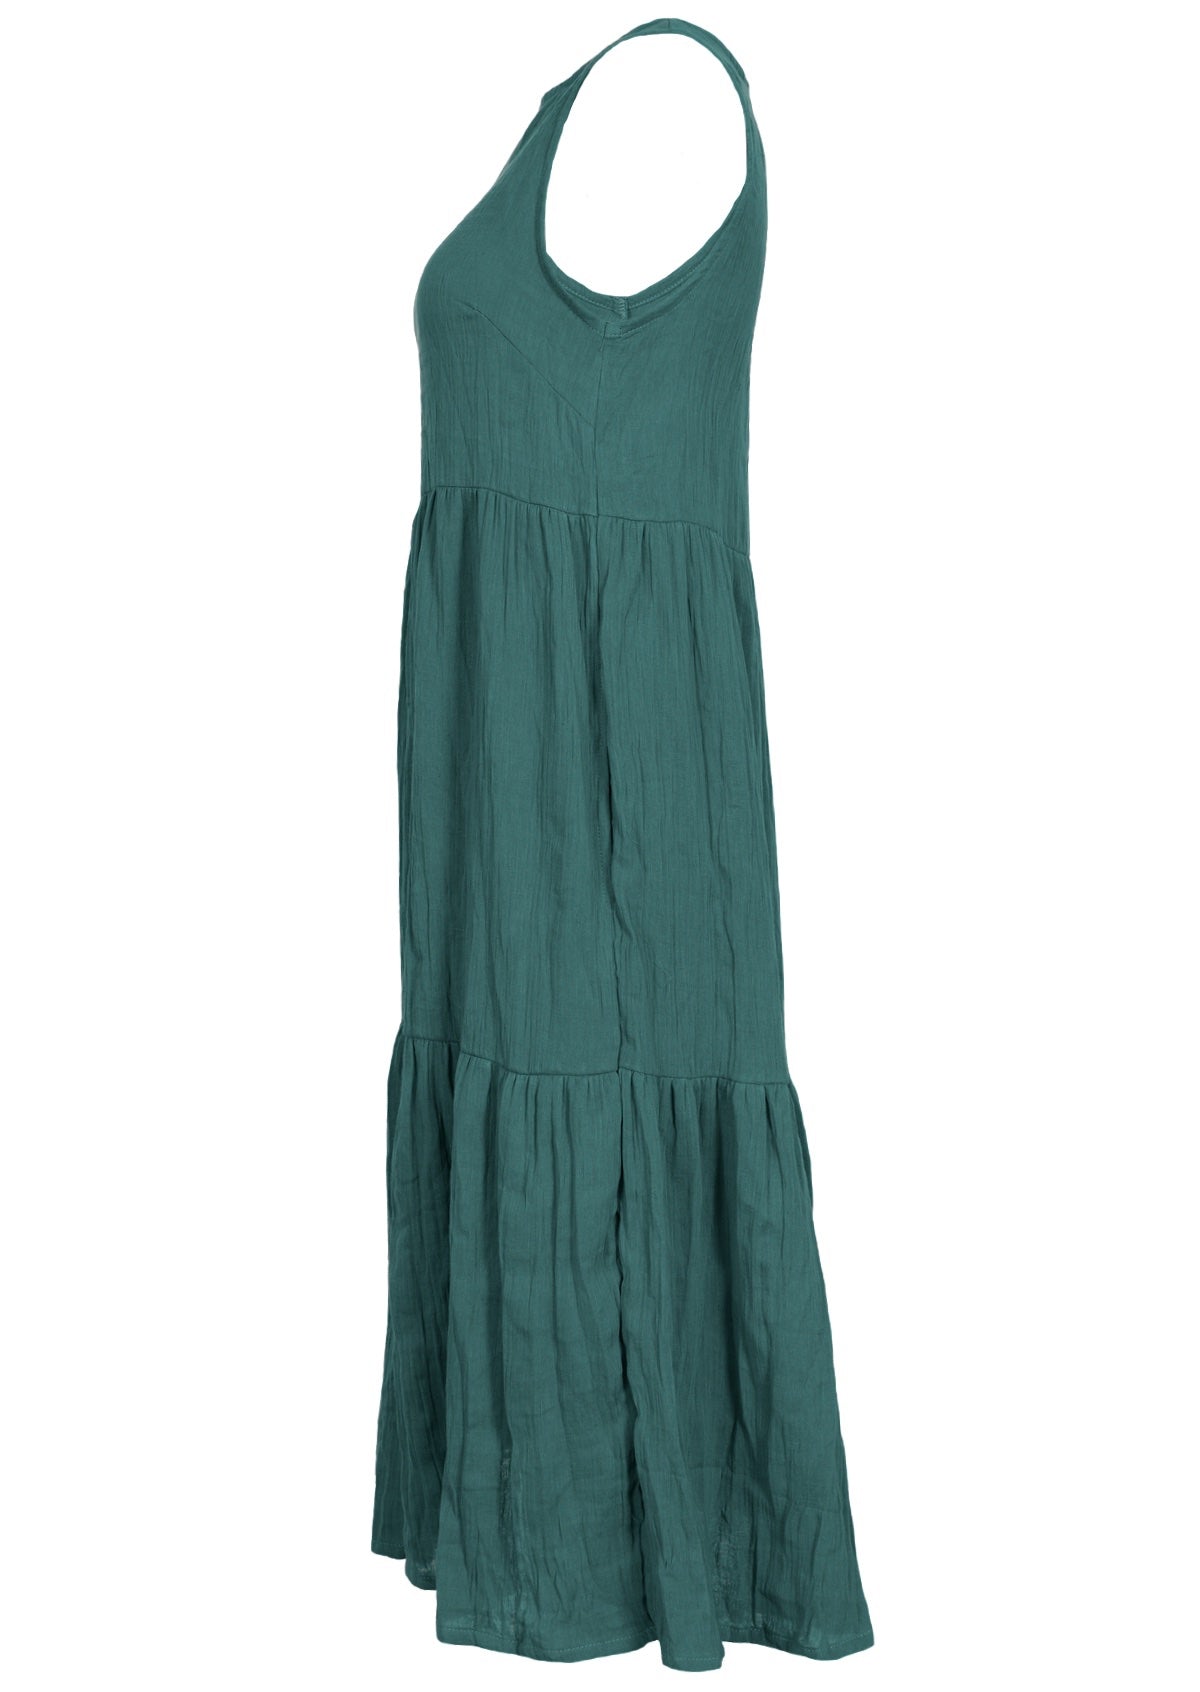 Sleeveless double cotton dress with three tiers and hidden side pockets